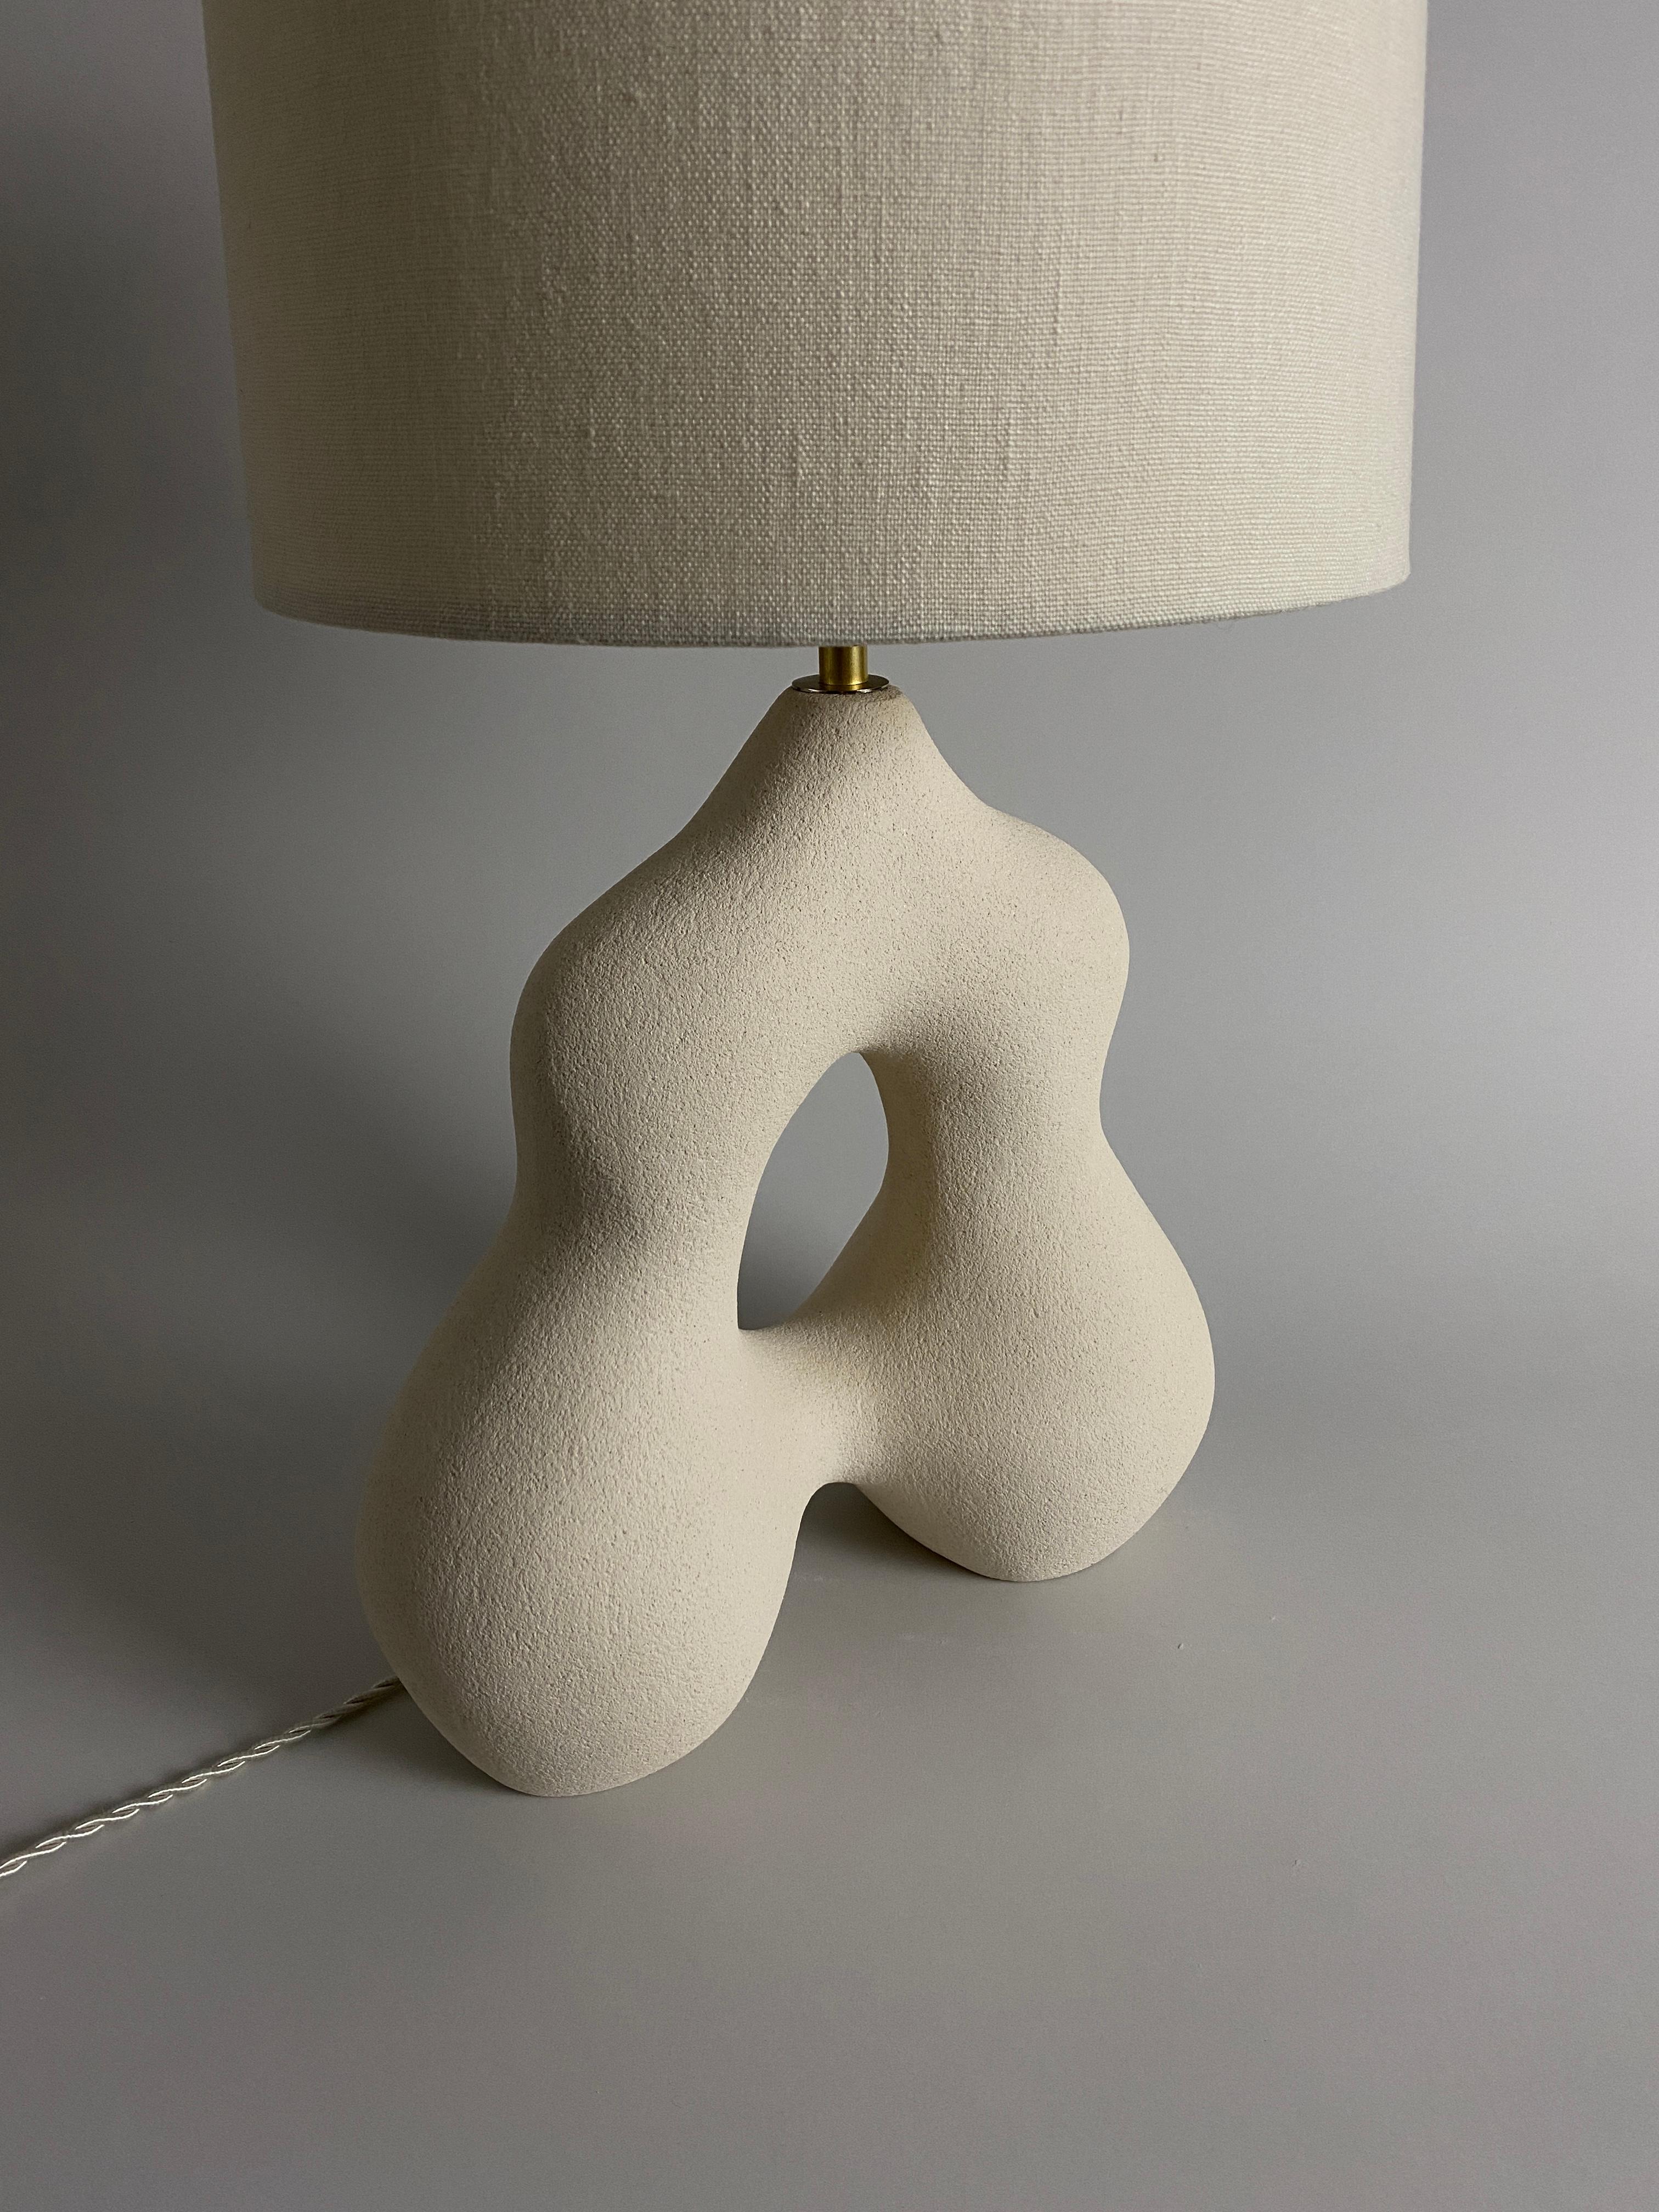 French Lamp Alexandrine Hand Sculpted by Hermine Bourdin